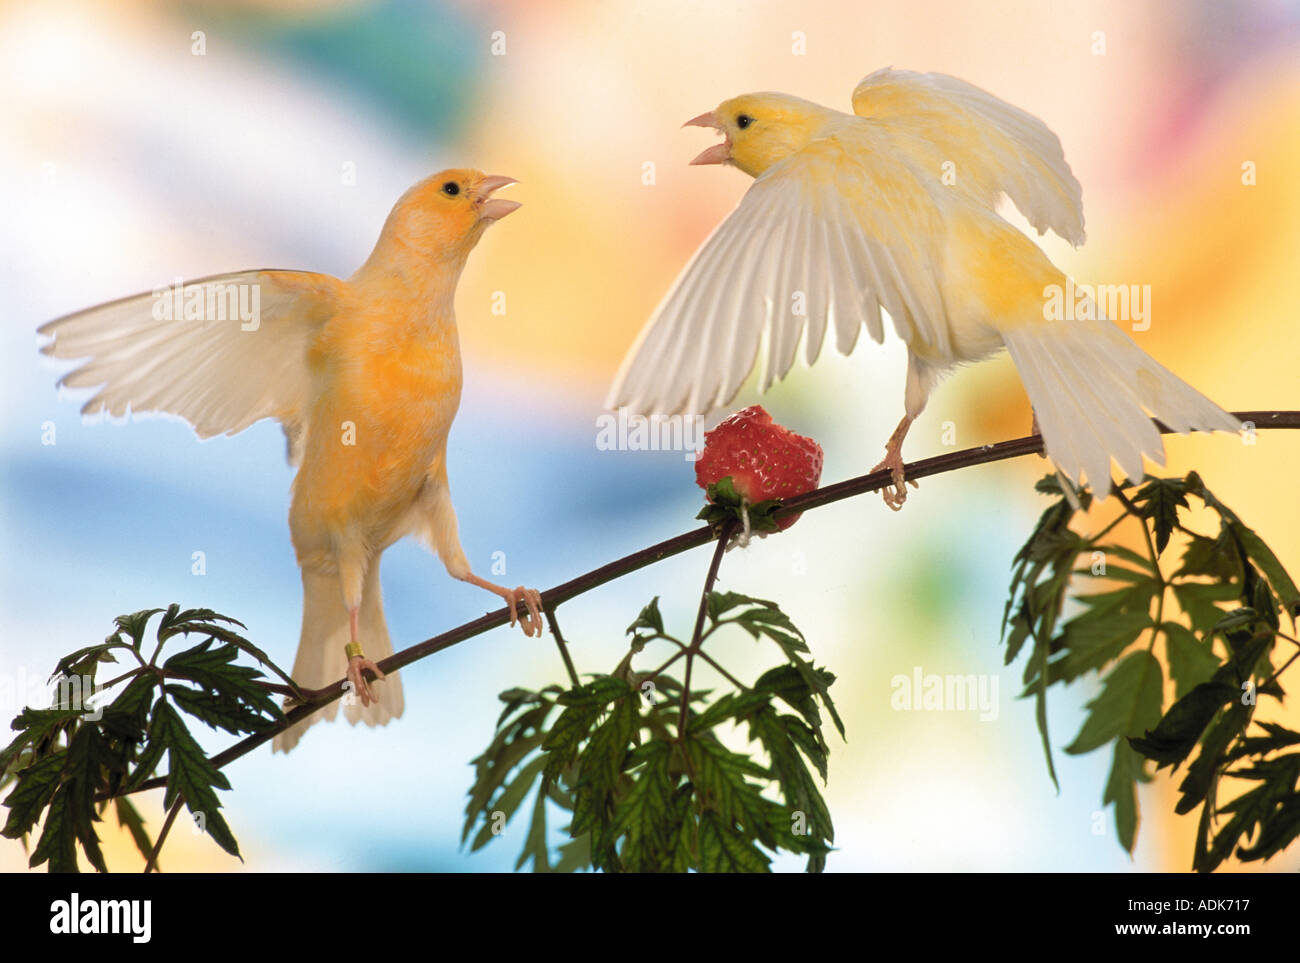 Domestic Canary. Two birds fighting over a strawberry. Germany Stock Photo